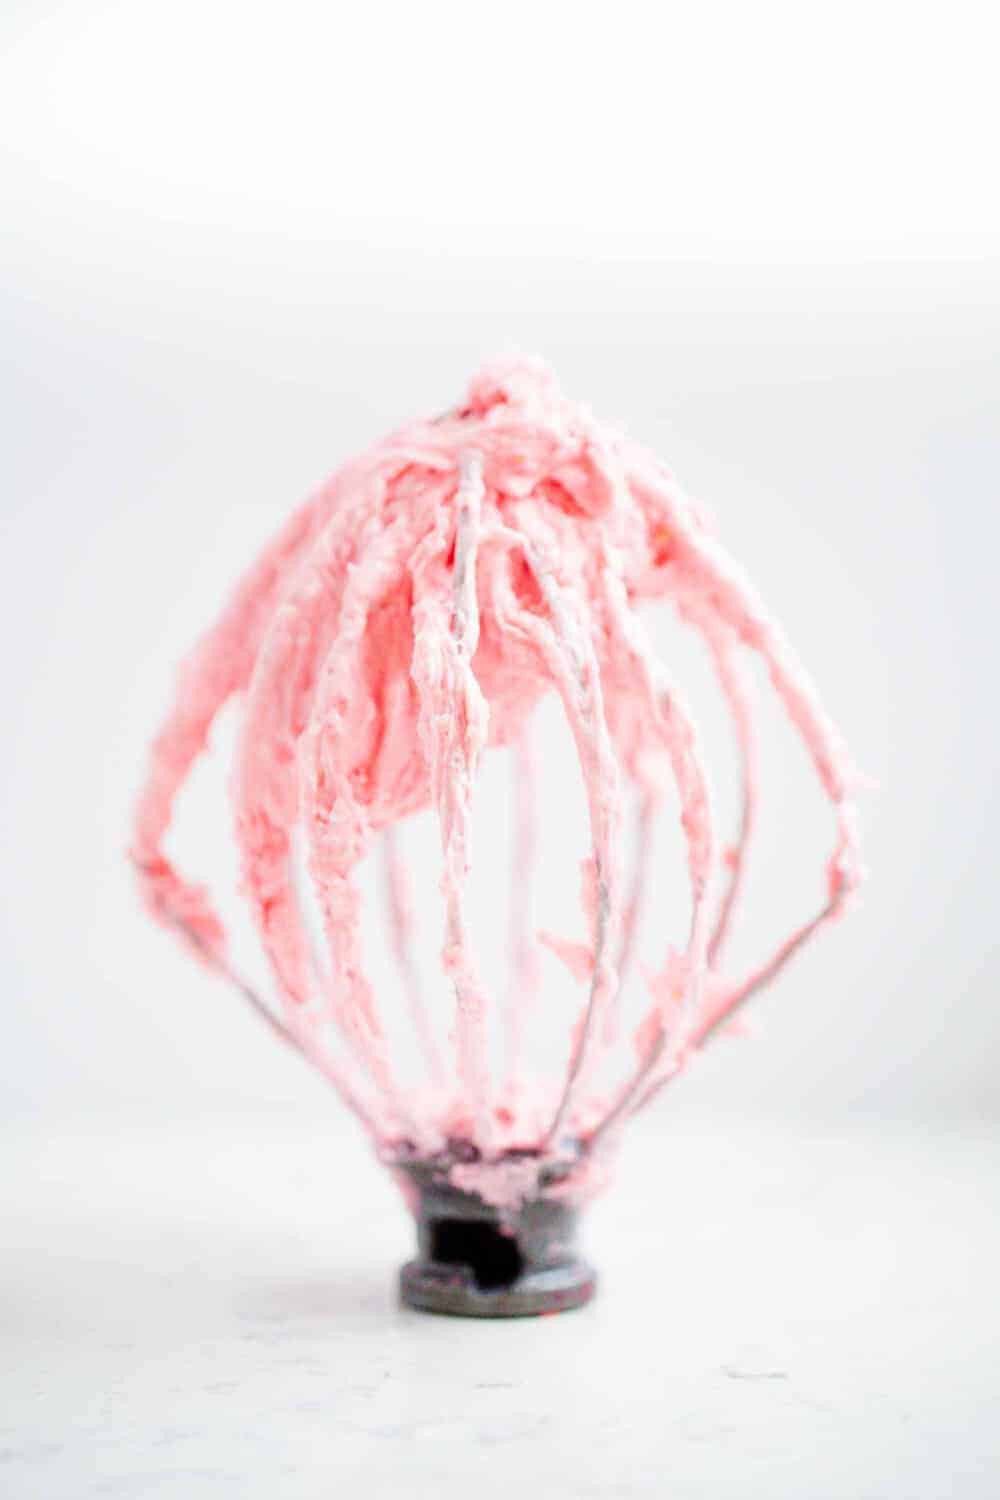 raspberry buttercream frosting on a whisk